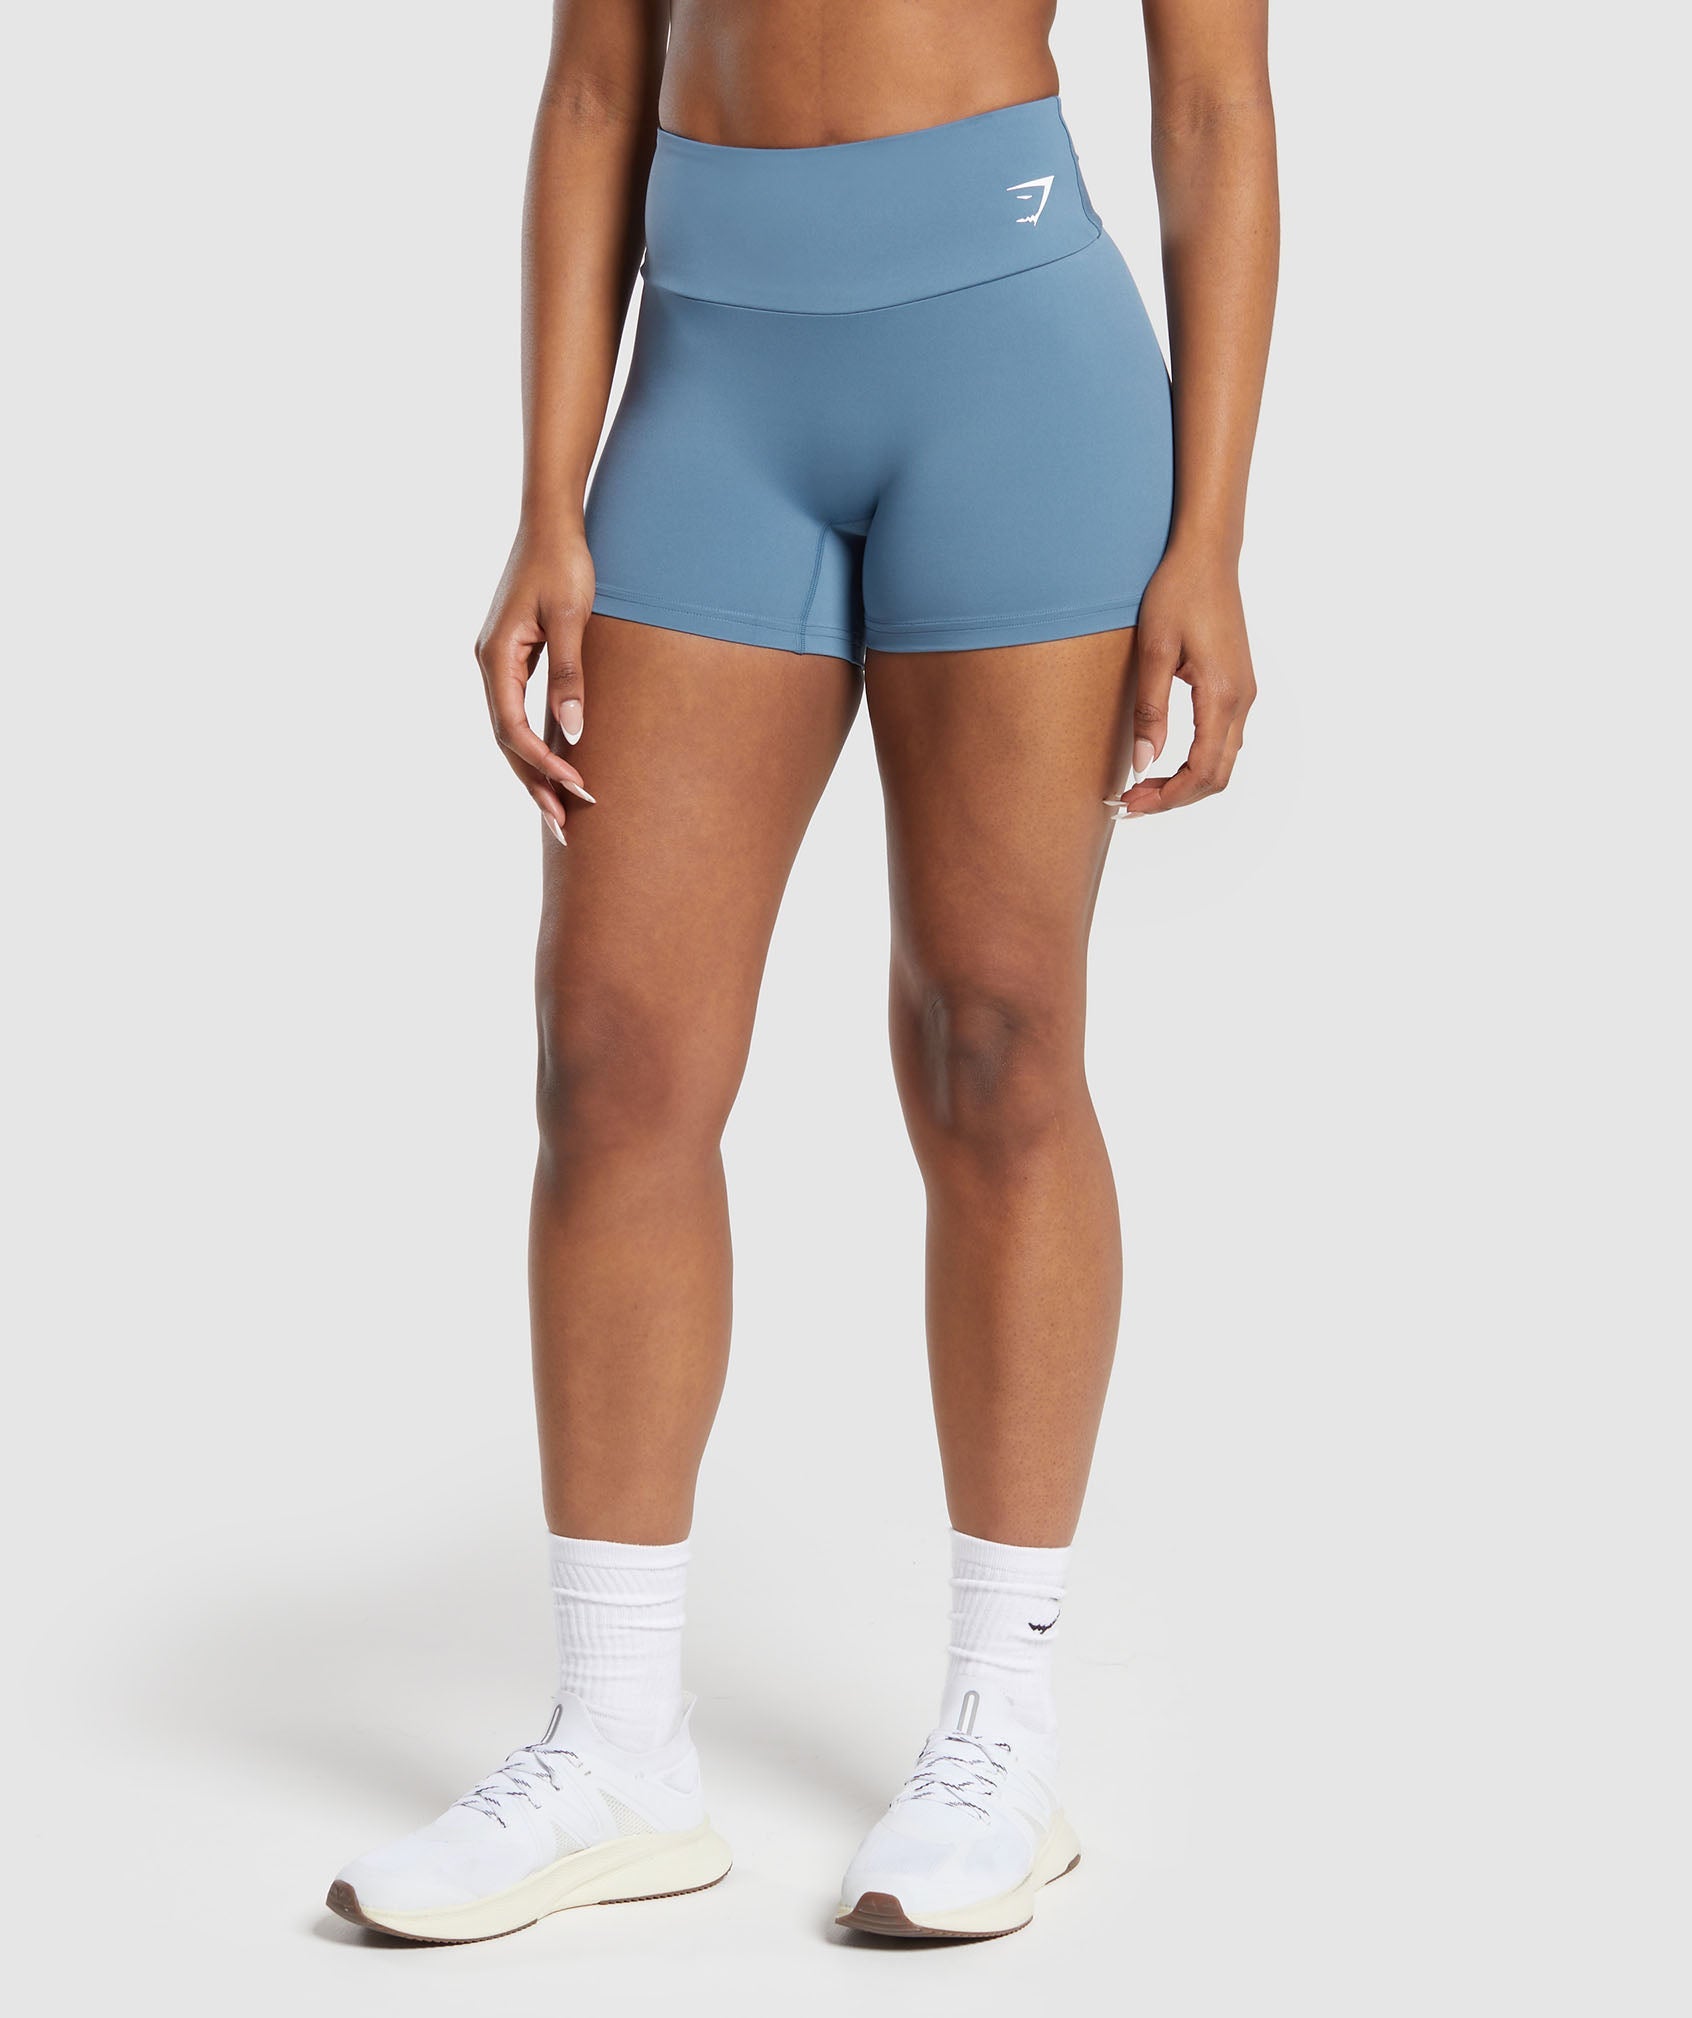 Training Tight Shorts in Faded Blue is out of stock